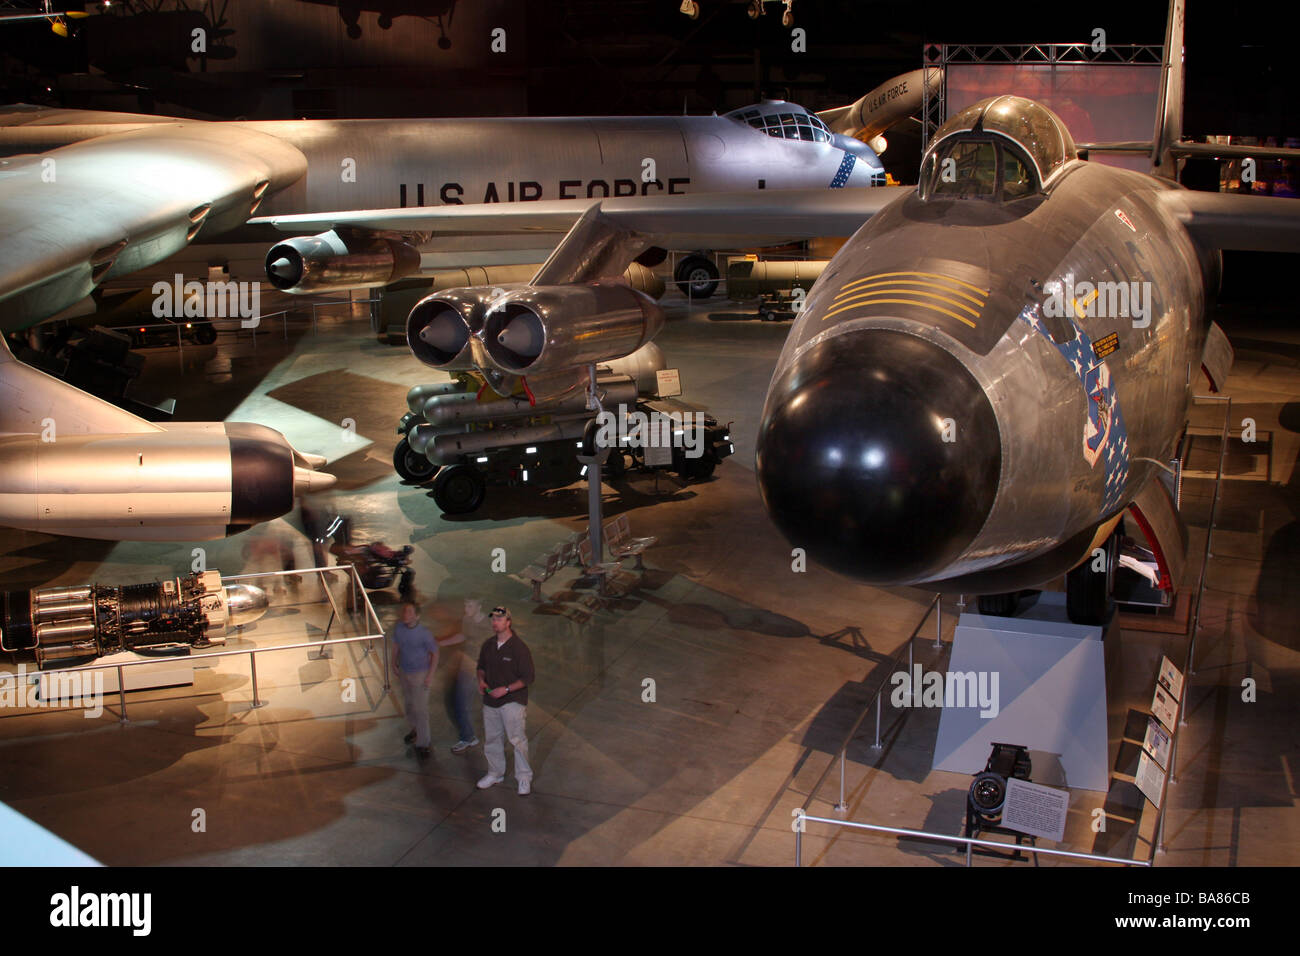 United States Air Force Museum Dayton Ohio Wright Patterson Banque D'Images